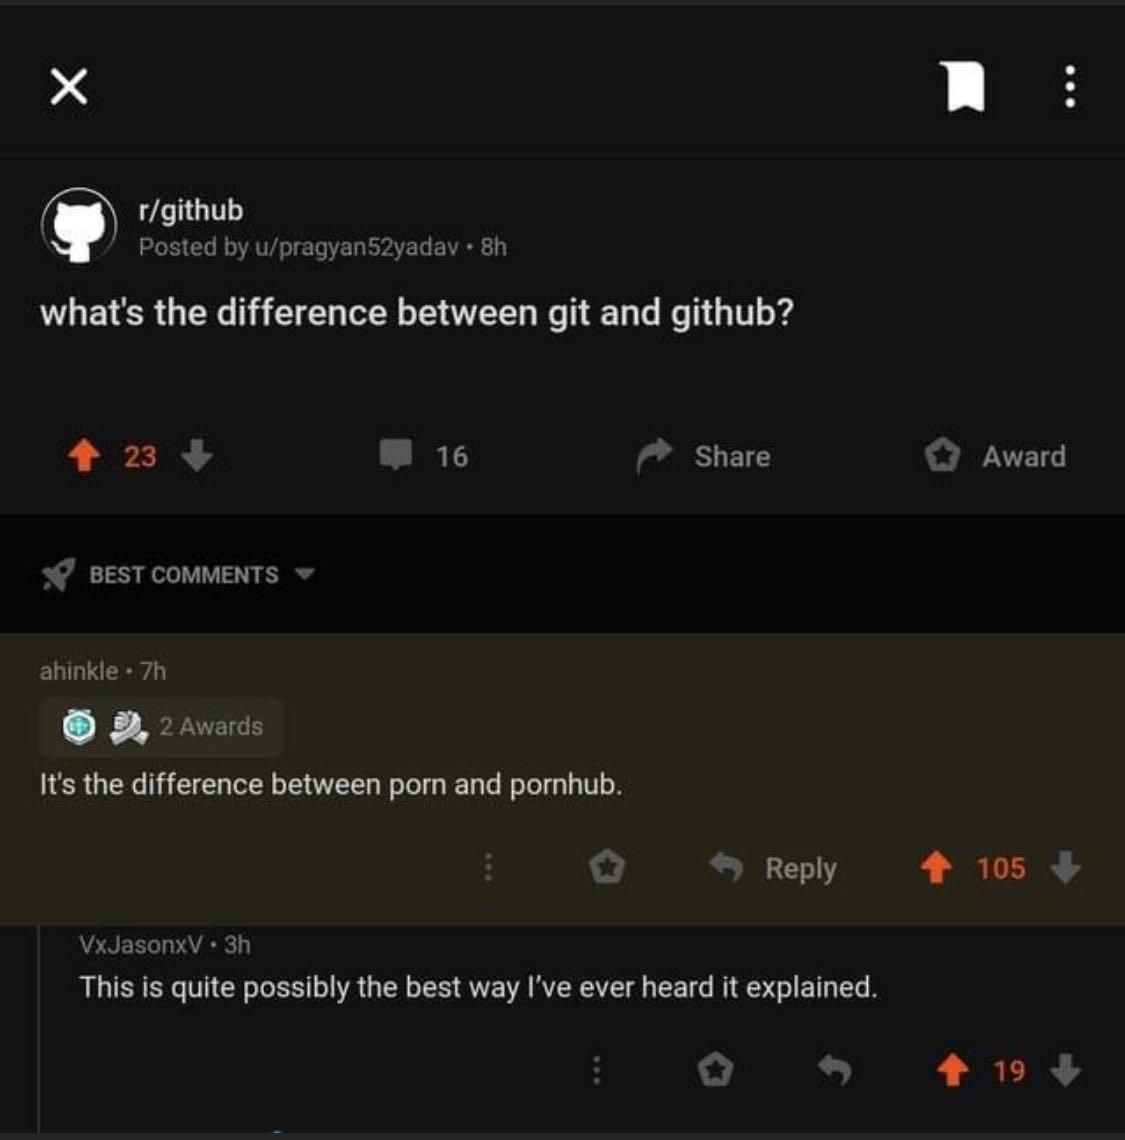 The difference between git and github